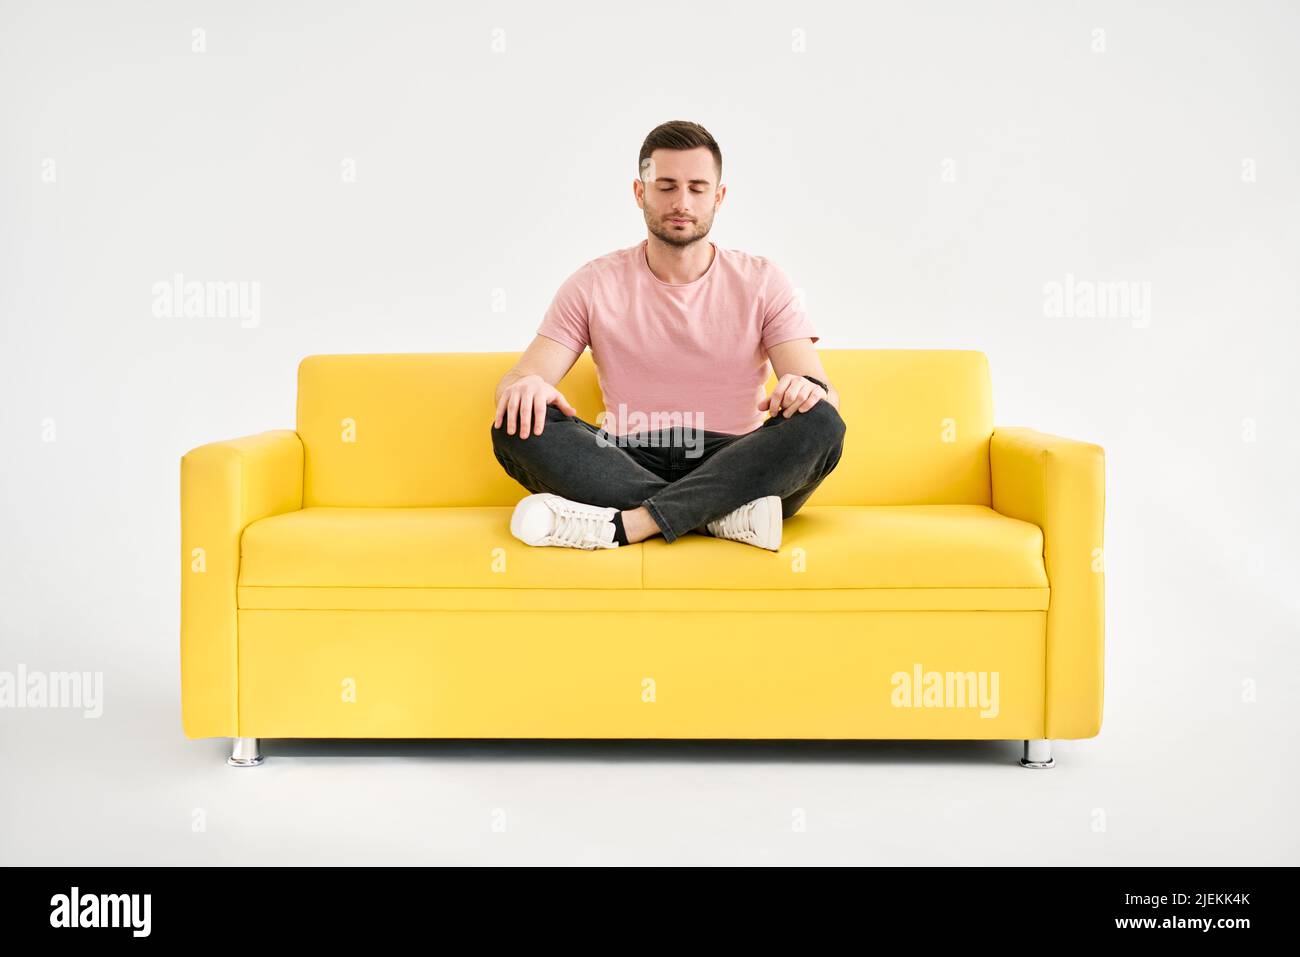 Handsome young man sitting in yoga lotus pose and meditating on comfortable yellow sofa over white background Stock Photo